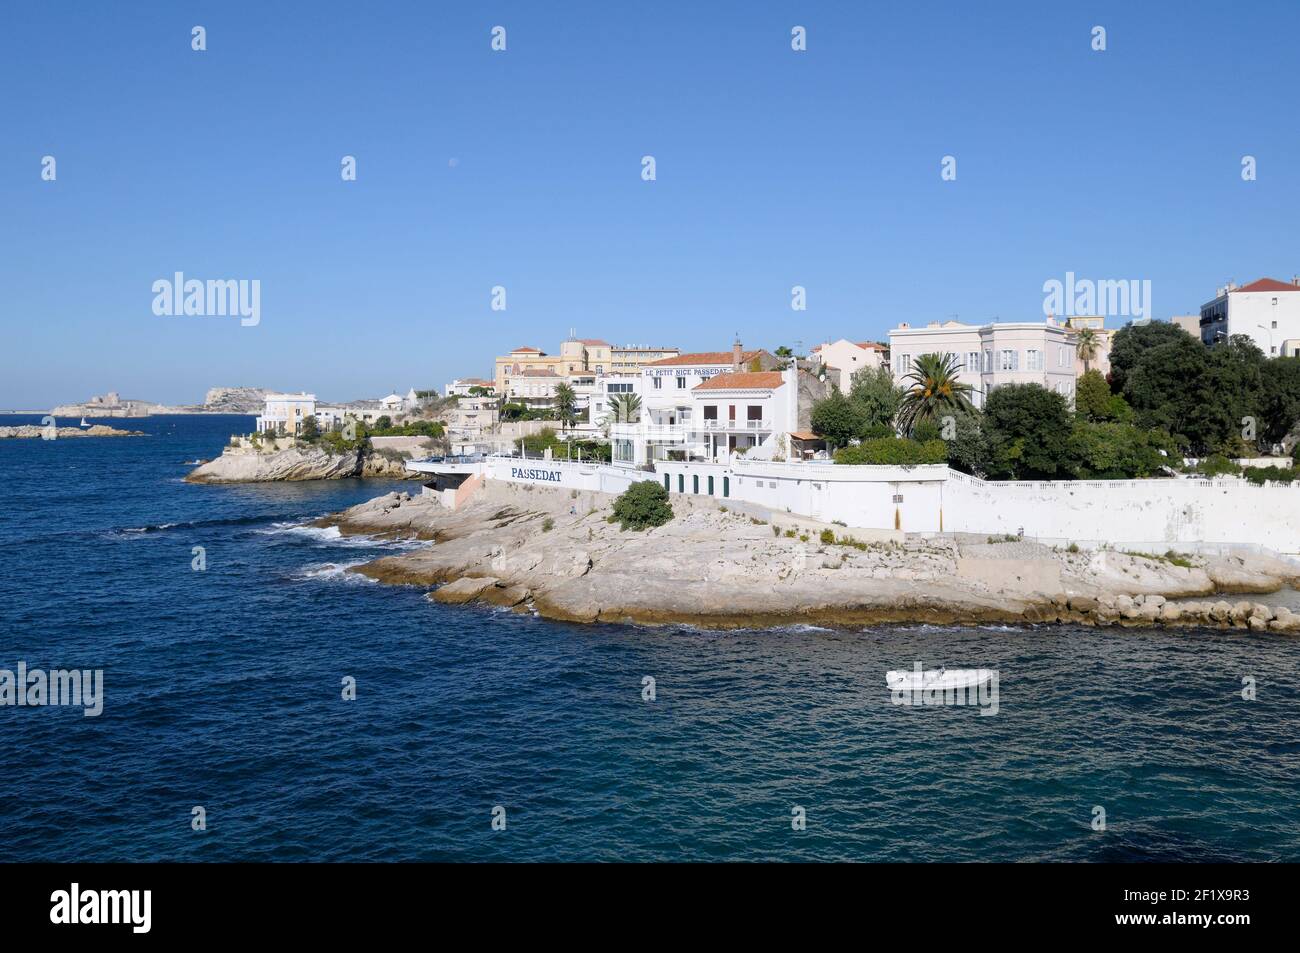 View of the 'Petit Nice' on the Corniche with Frioul and Château d'If in the background, Marseille, Bouches-du-Rhone, Provence-Alpes-Cote d'Azur, Fran Stock Photo